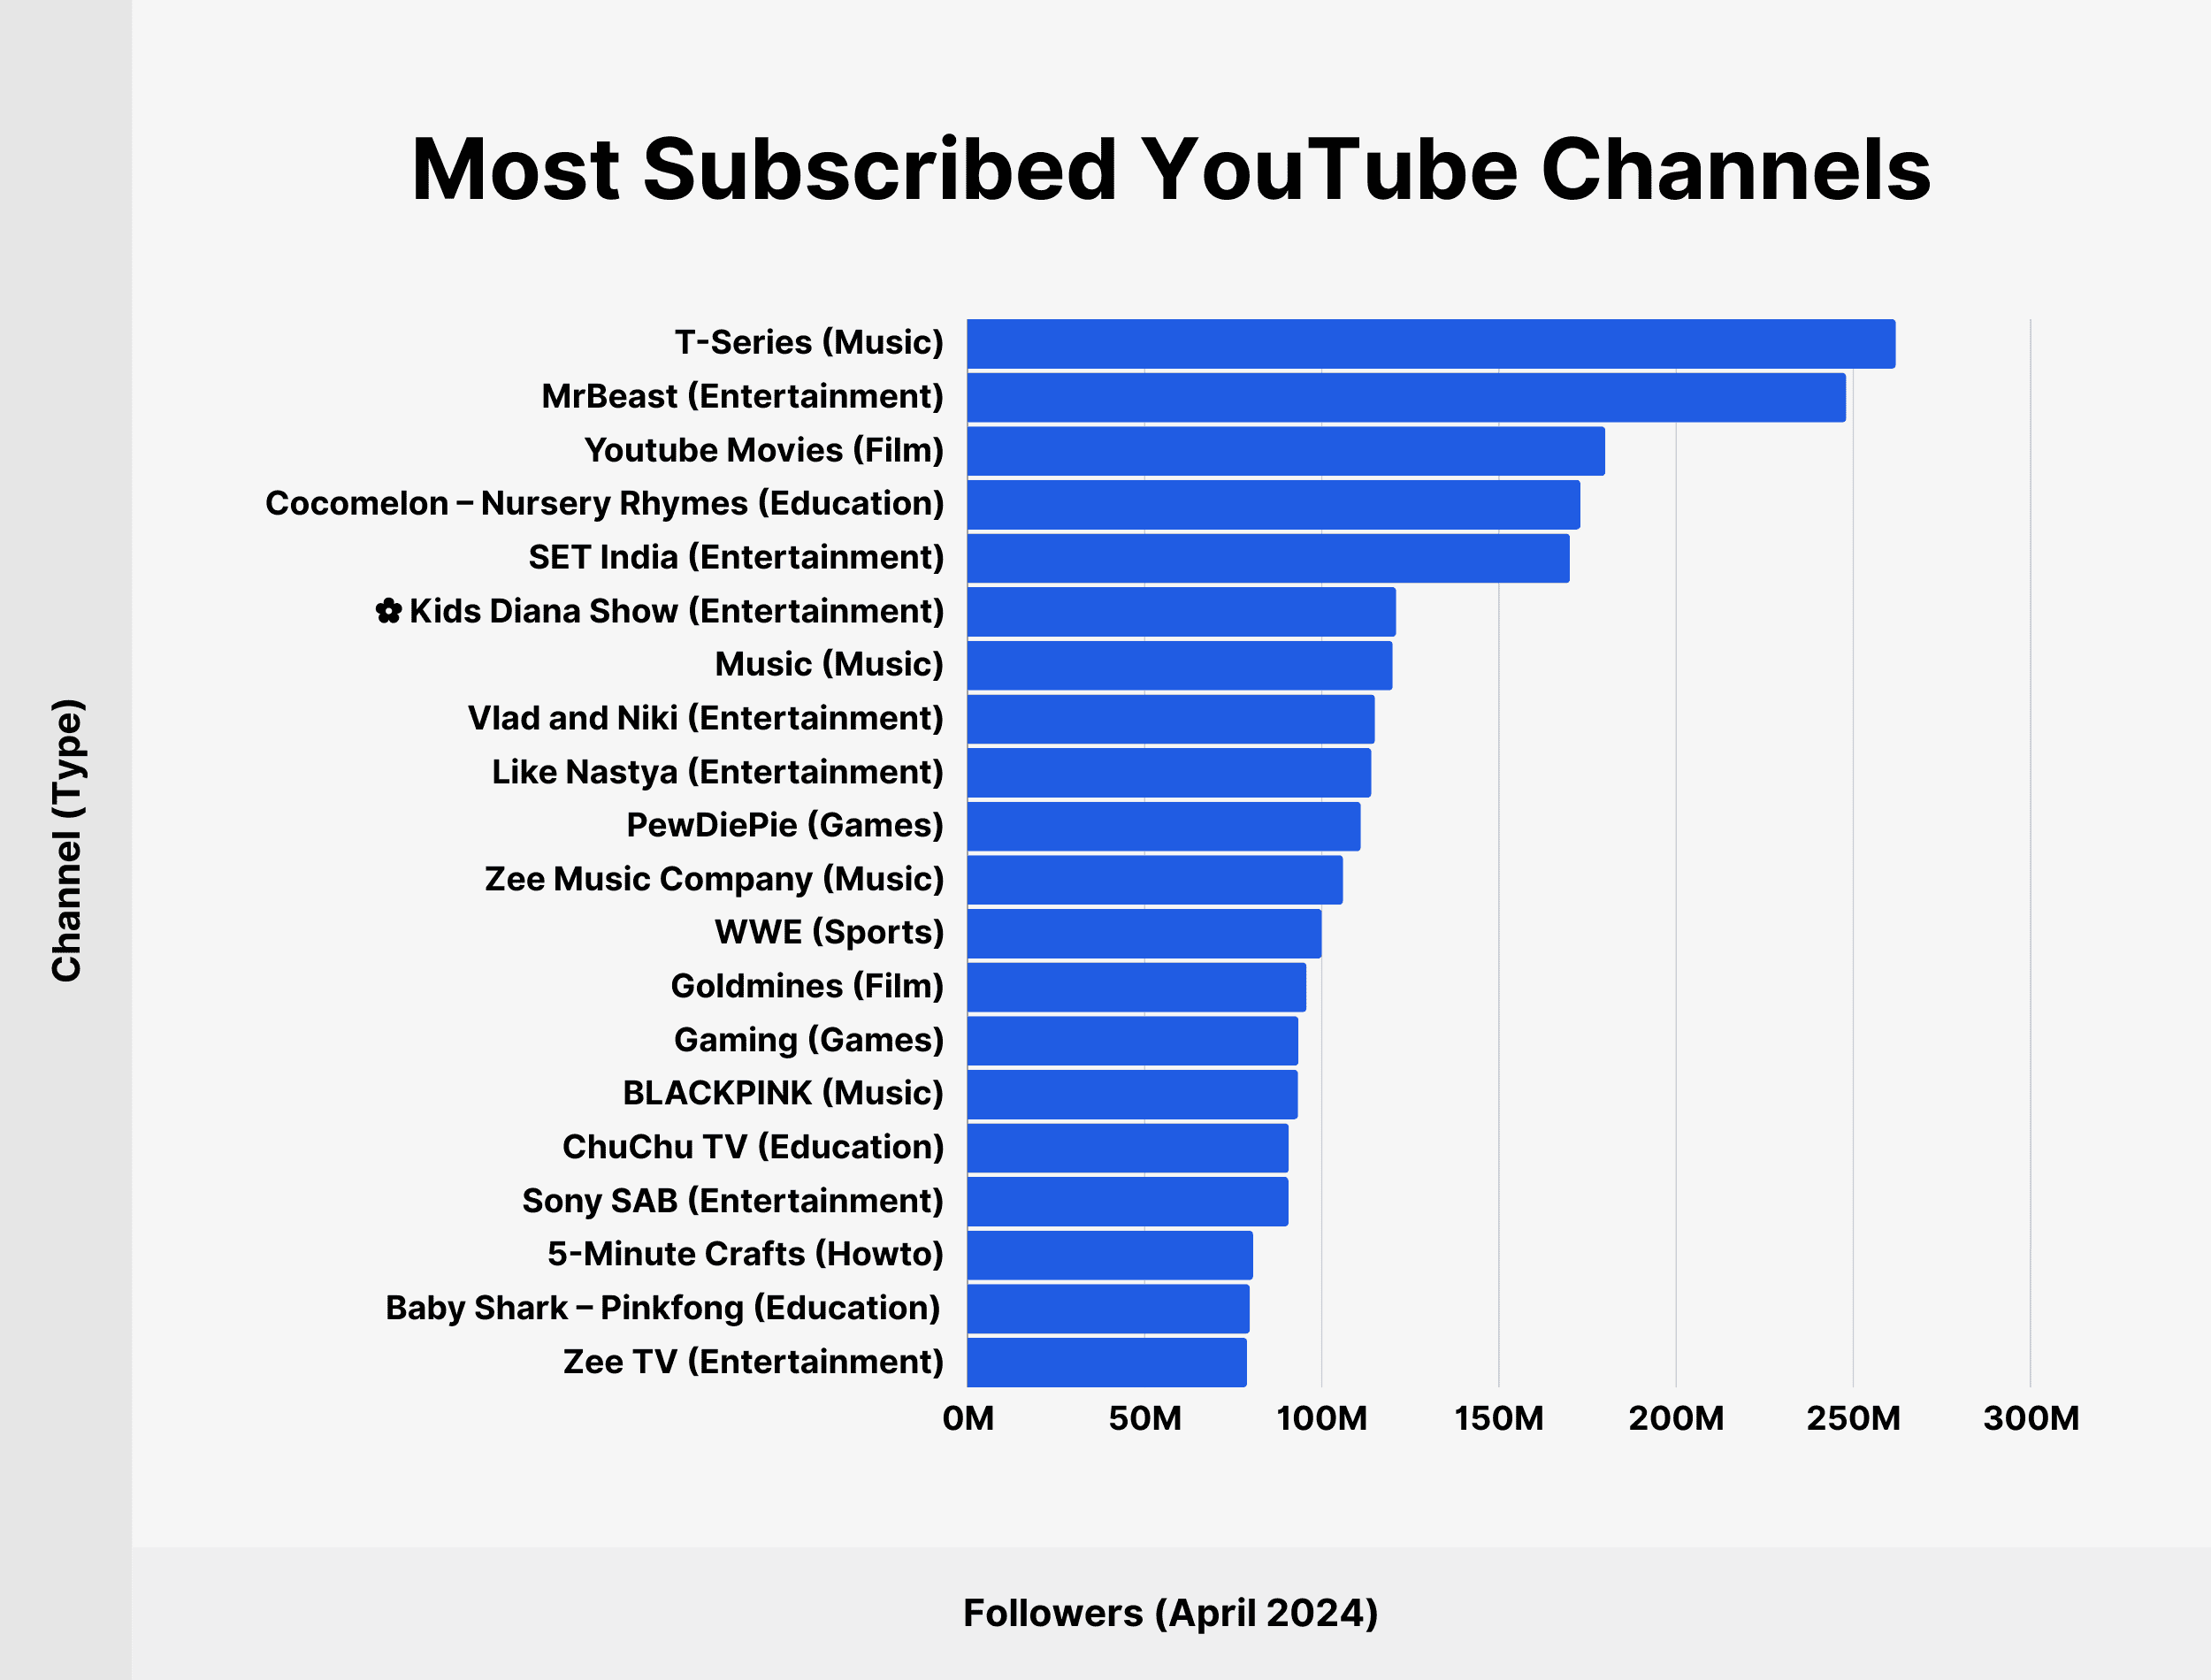 Most Subscribed YouTube Channels